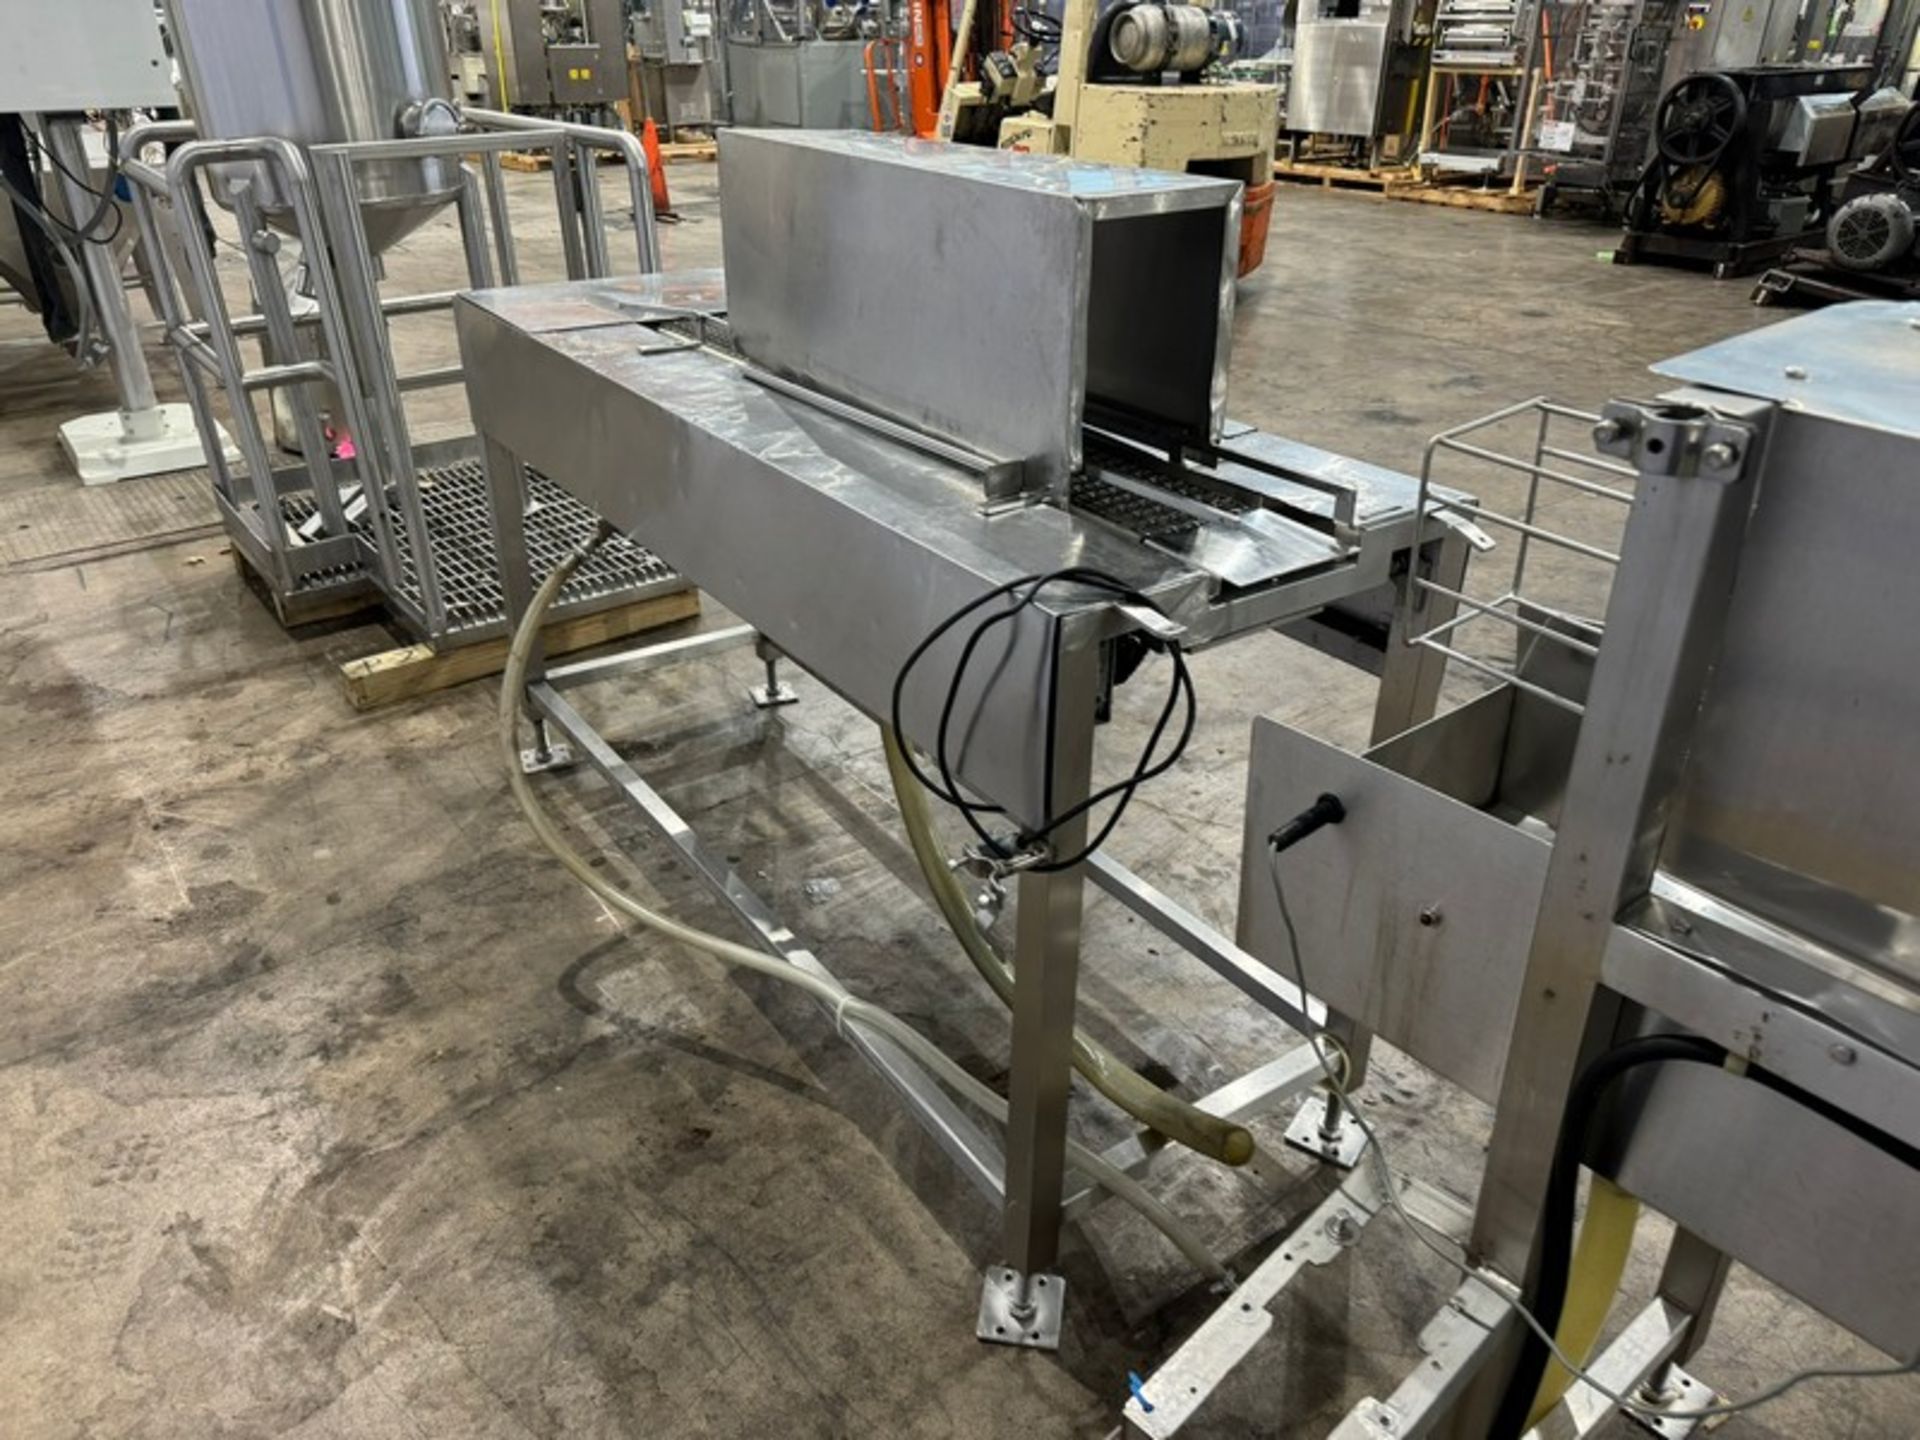 Spray Tunnel & Conveyor,with Aprox. 6” W S/S Conveyor, with S/S Bottle Orientor Conveyor, Mounted on - Image 6 of 10